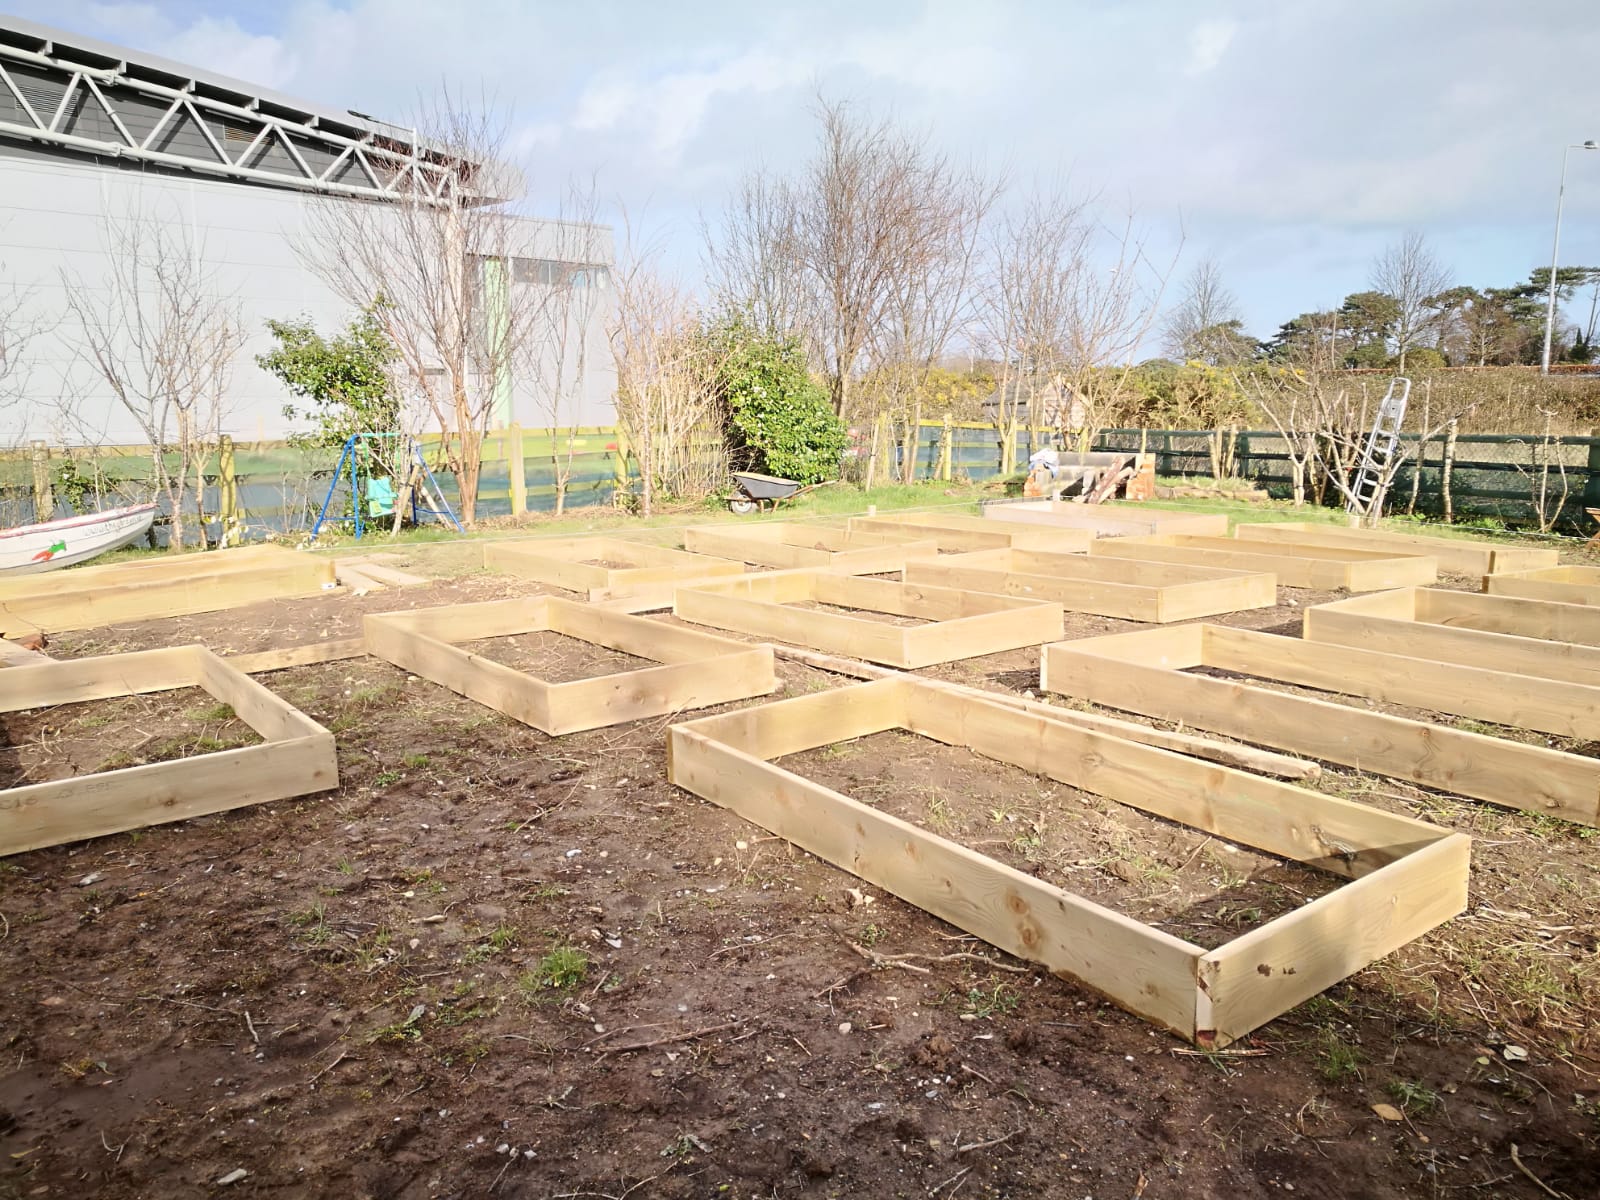 Raised bed boxes